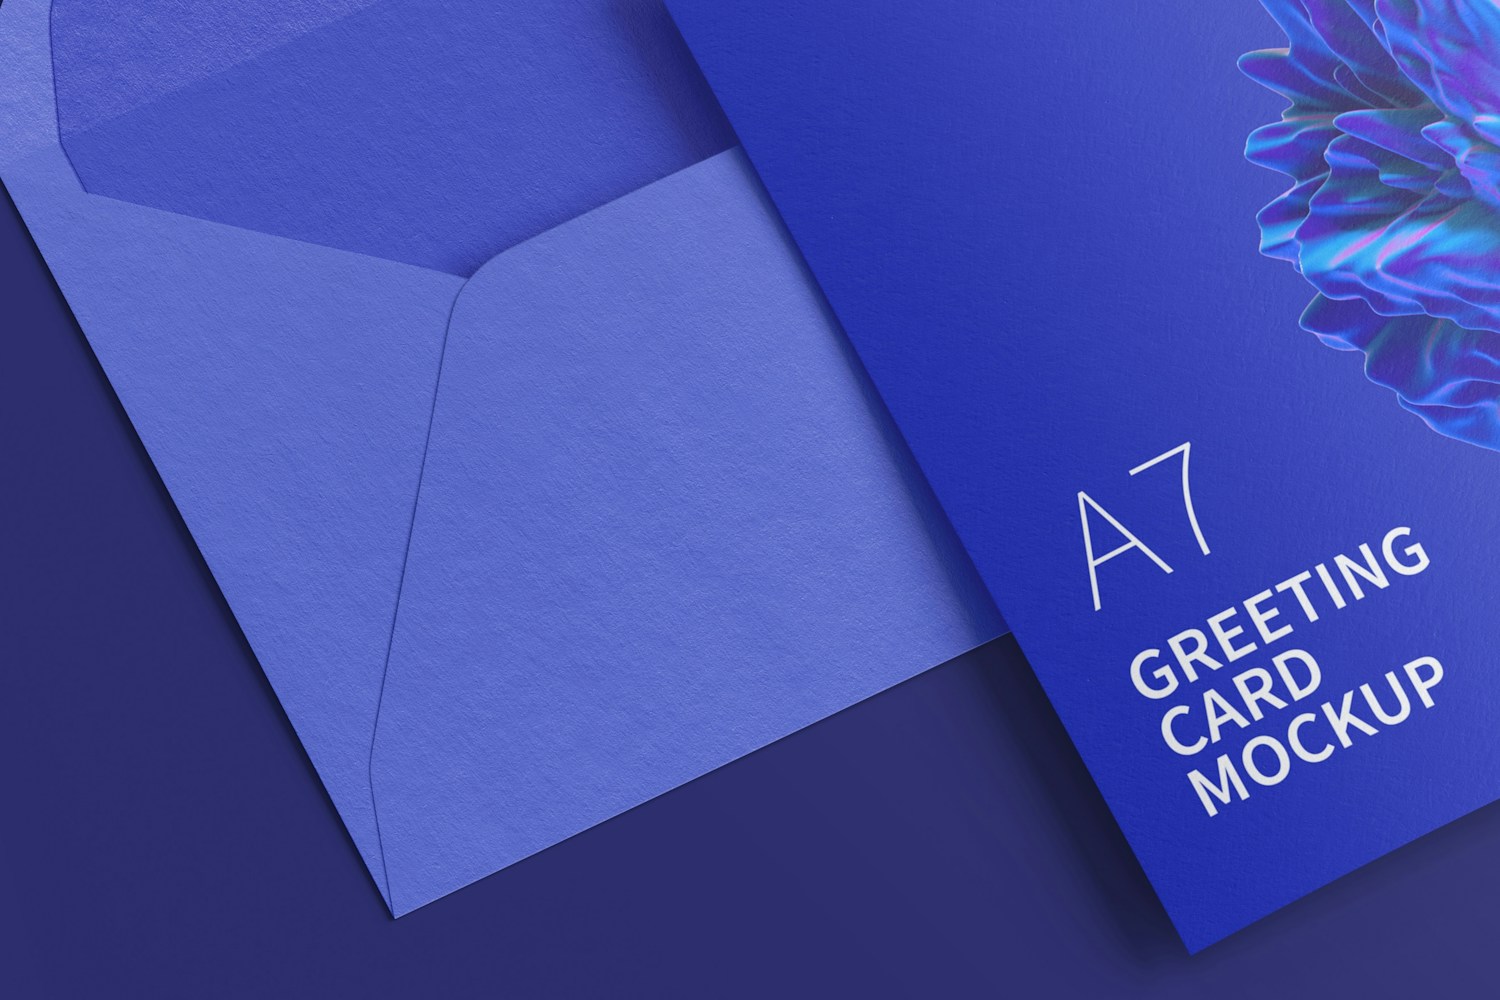 A7 Greeting Card Mockup with Envelope, Spread Pages